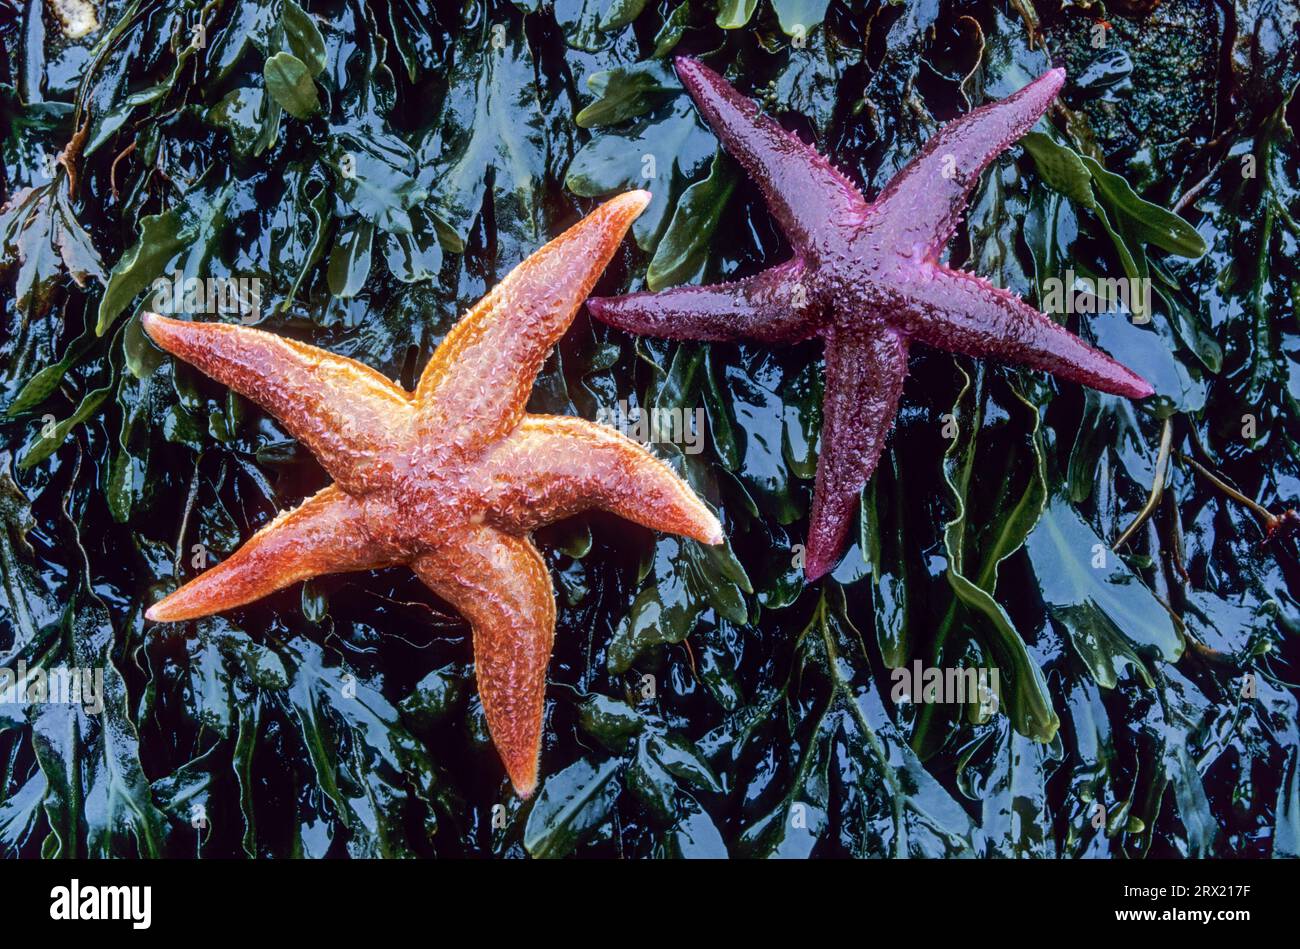 Common Starfish (Asterias rubens) reaches an average size of 10, 30cm, but specimens up to 52cm are also known (Photo starfish on seaweed), Common Stock Photo